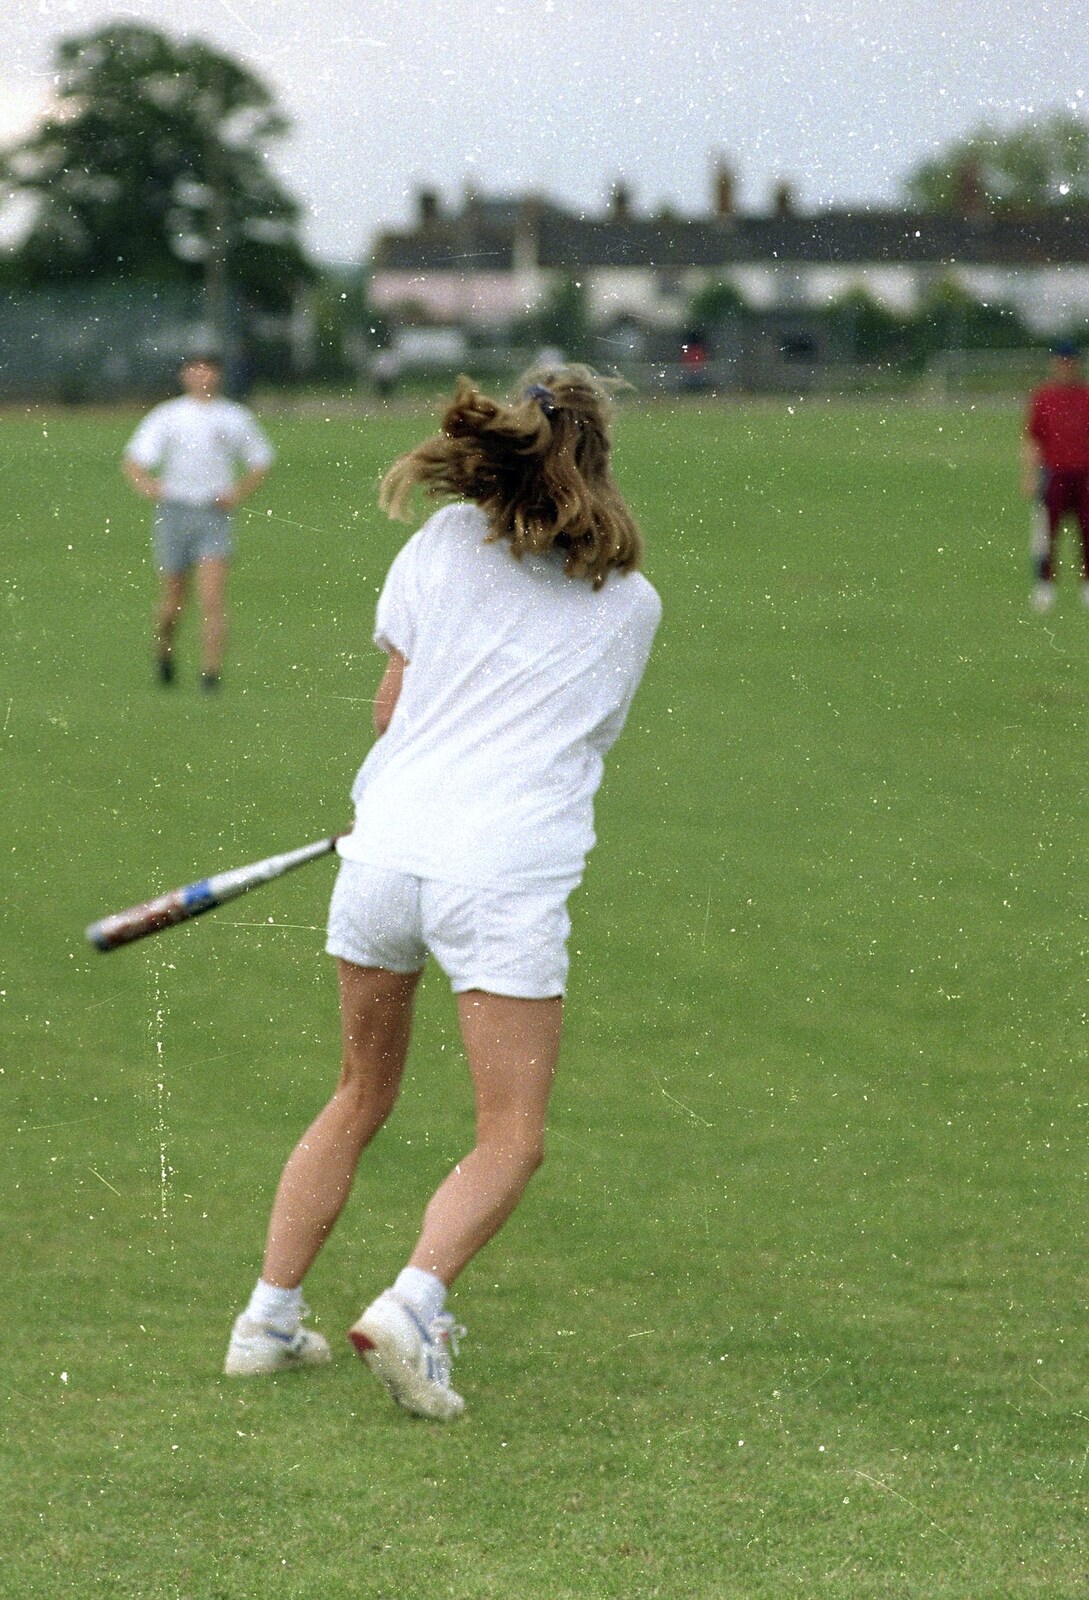 Clays Softball and Printec Reunion, Ditchingham and Stoke Ash, Suffolk - 2nd June 1994: Action shot